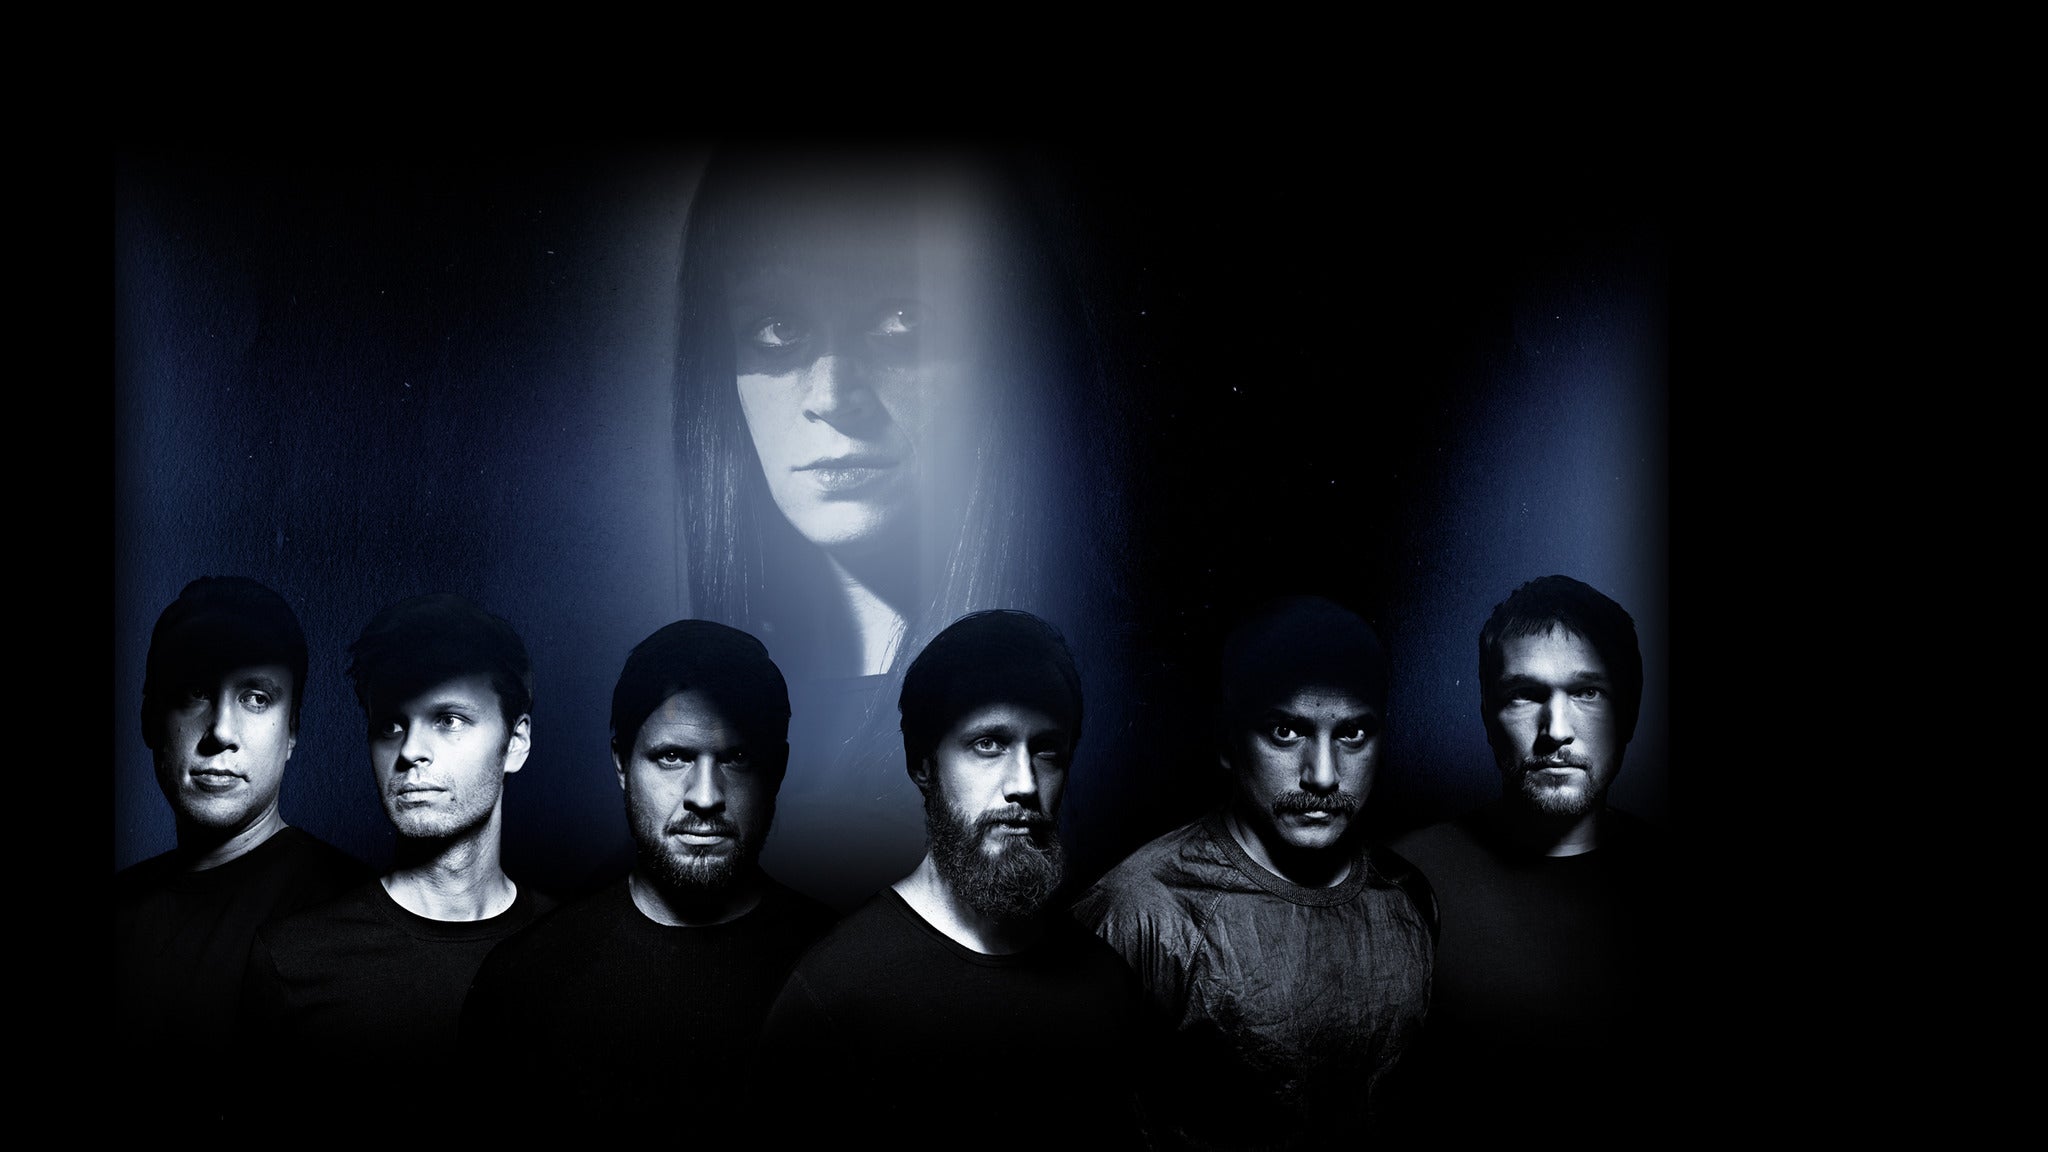 CULT OF LUNA with Julie Christmas in New York promo photo for Live Nation presale offer code